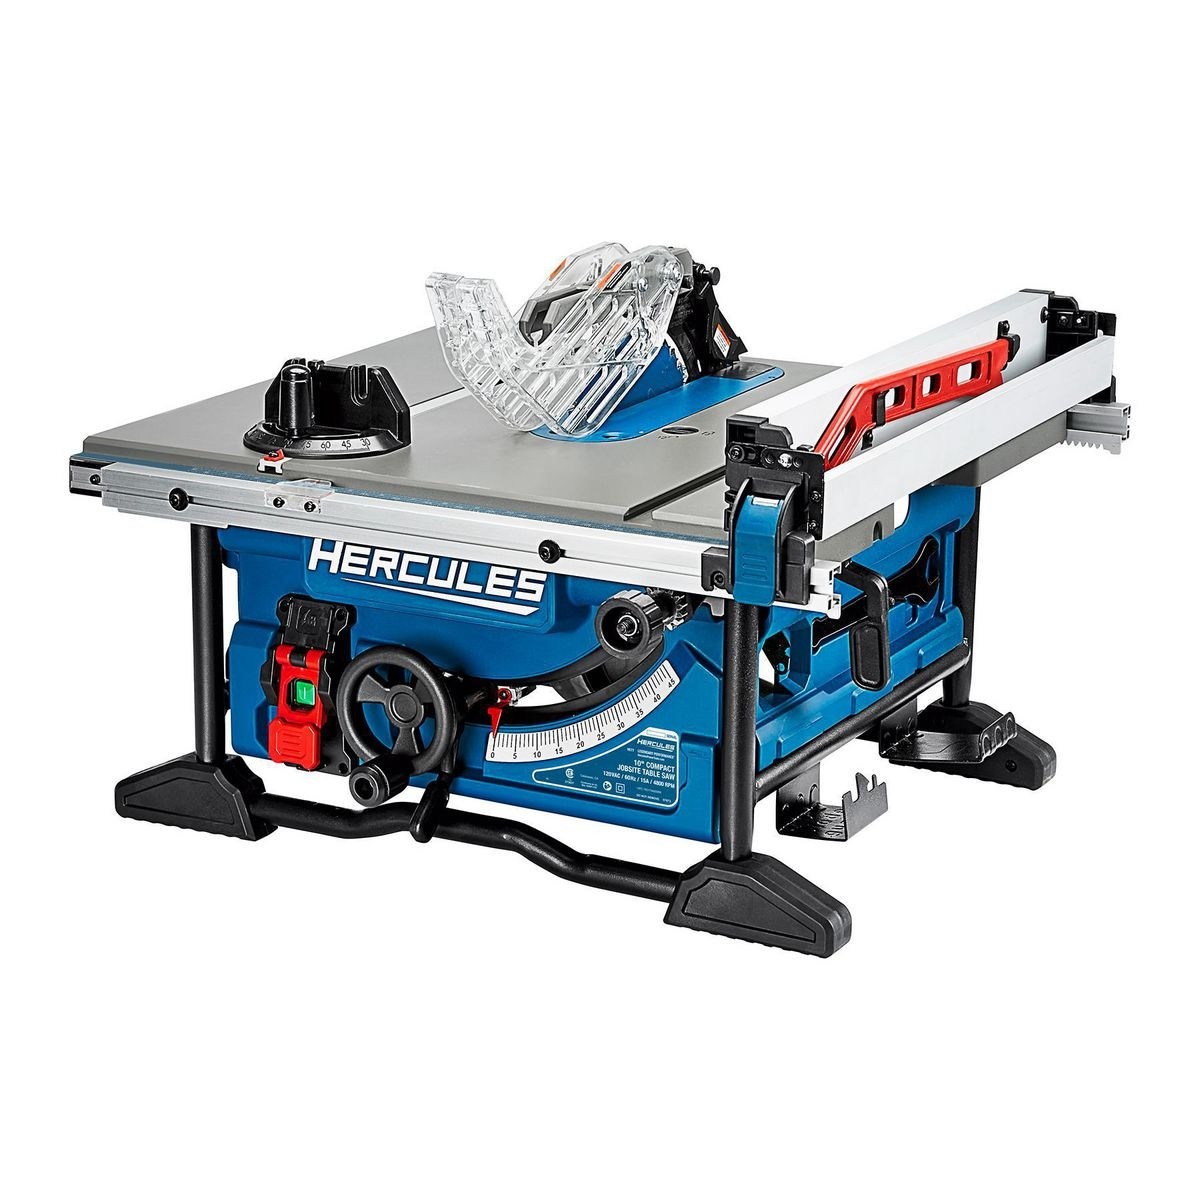 HERCULES 10 in. – 15 Amp Compact Jobsite Table Saw with Rack and Pinion